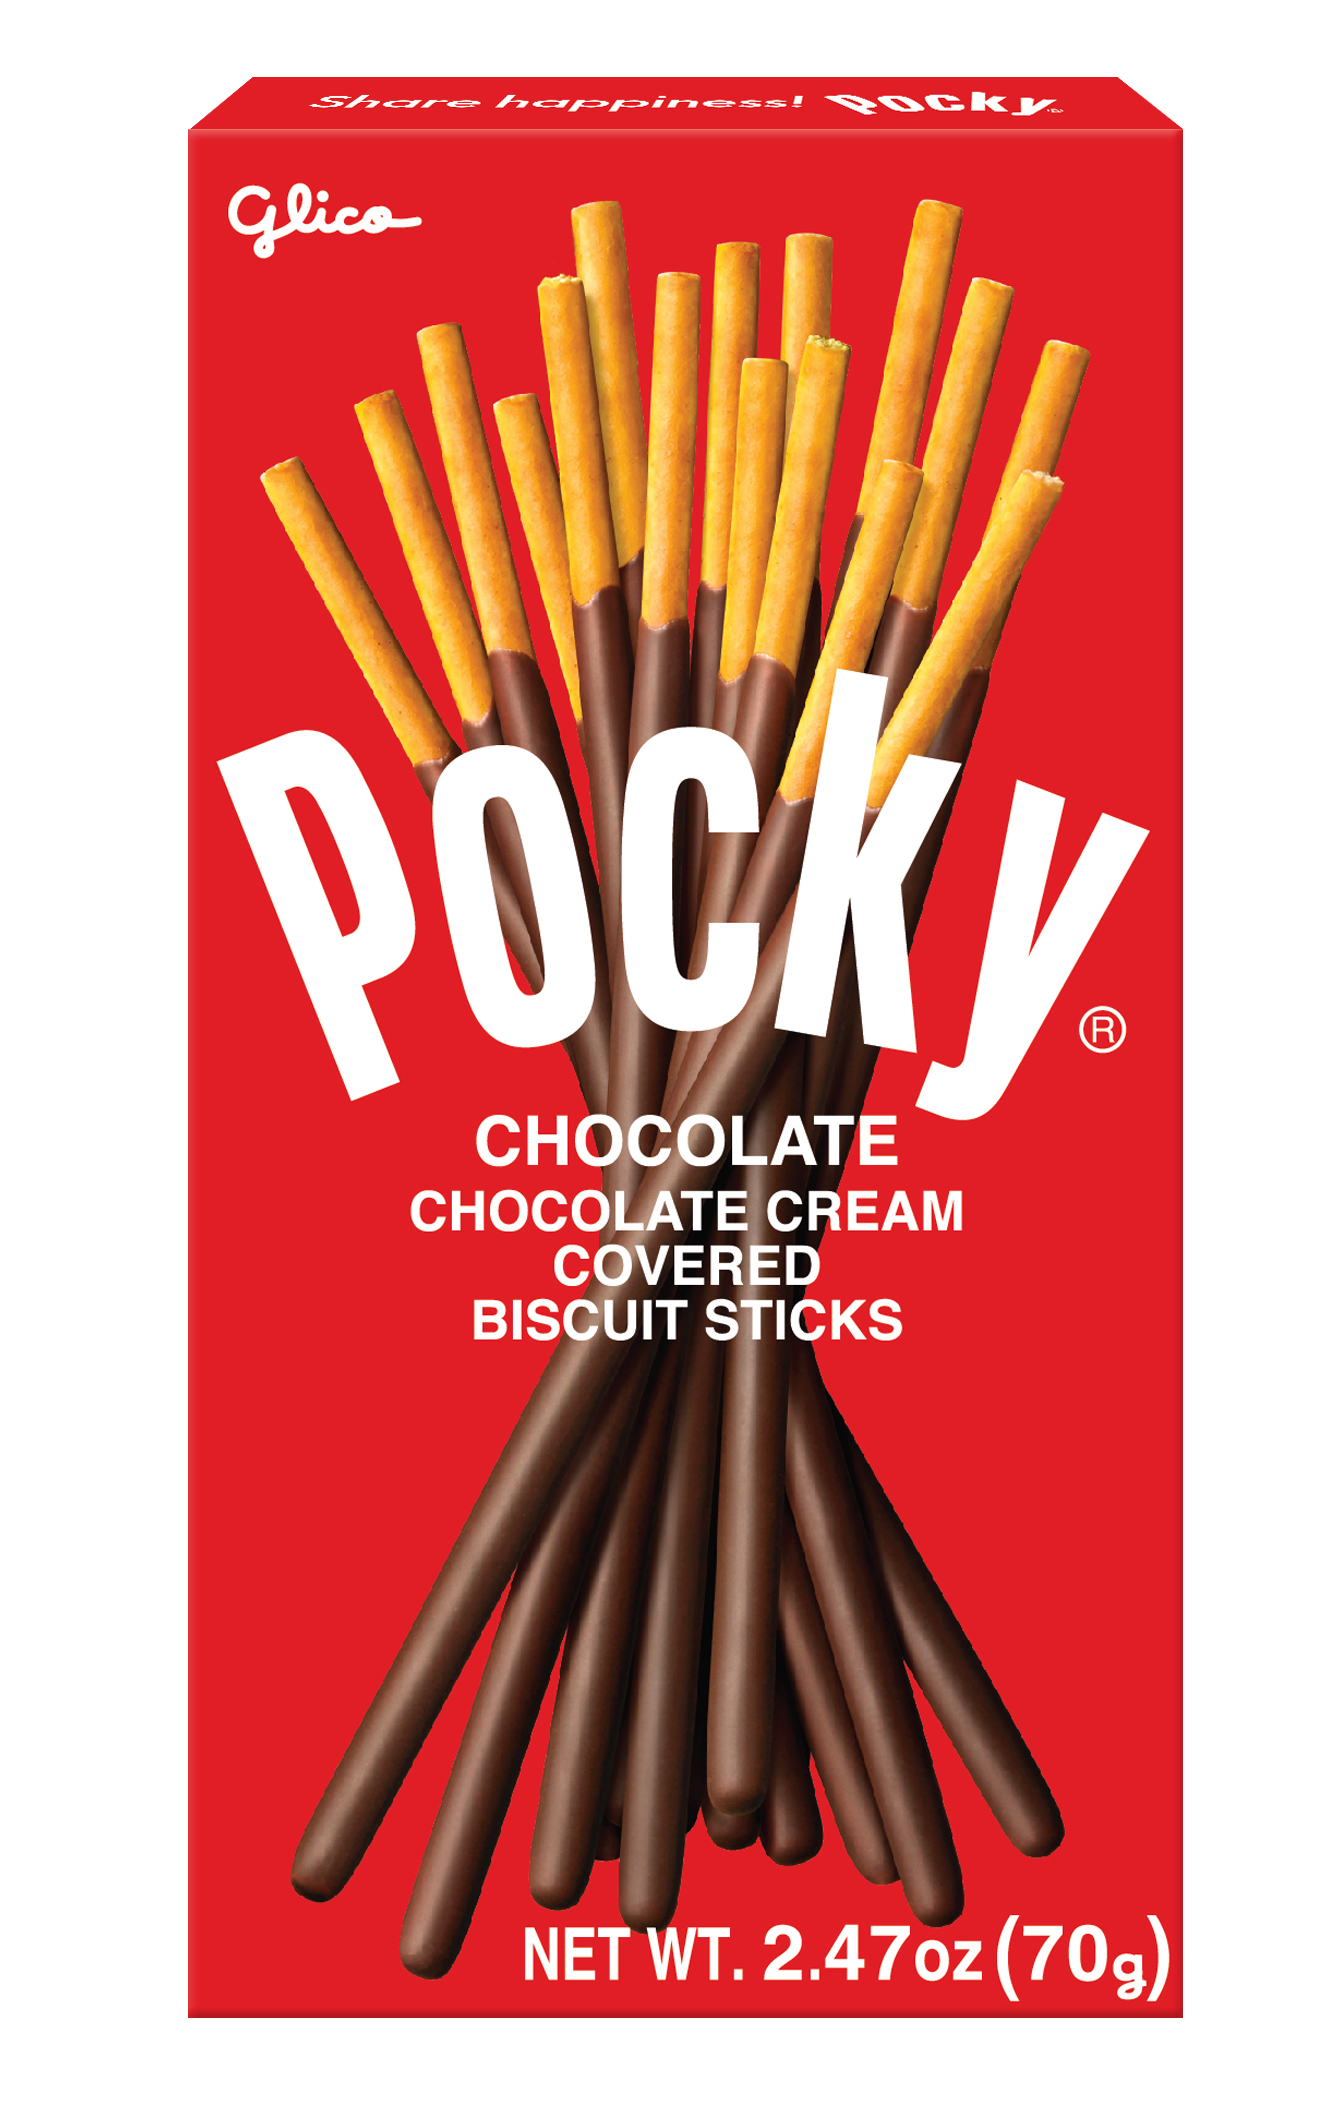 https://www.glico.com/assets/images/original/Pocky%20Chocolate%2070g_Front.png